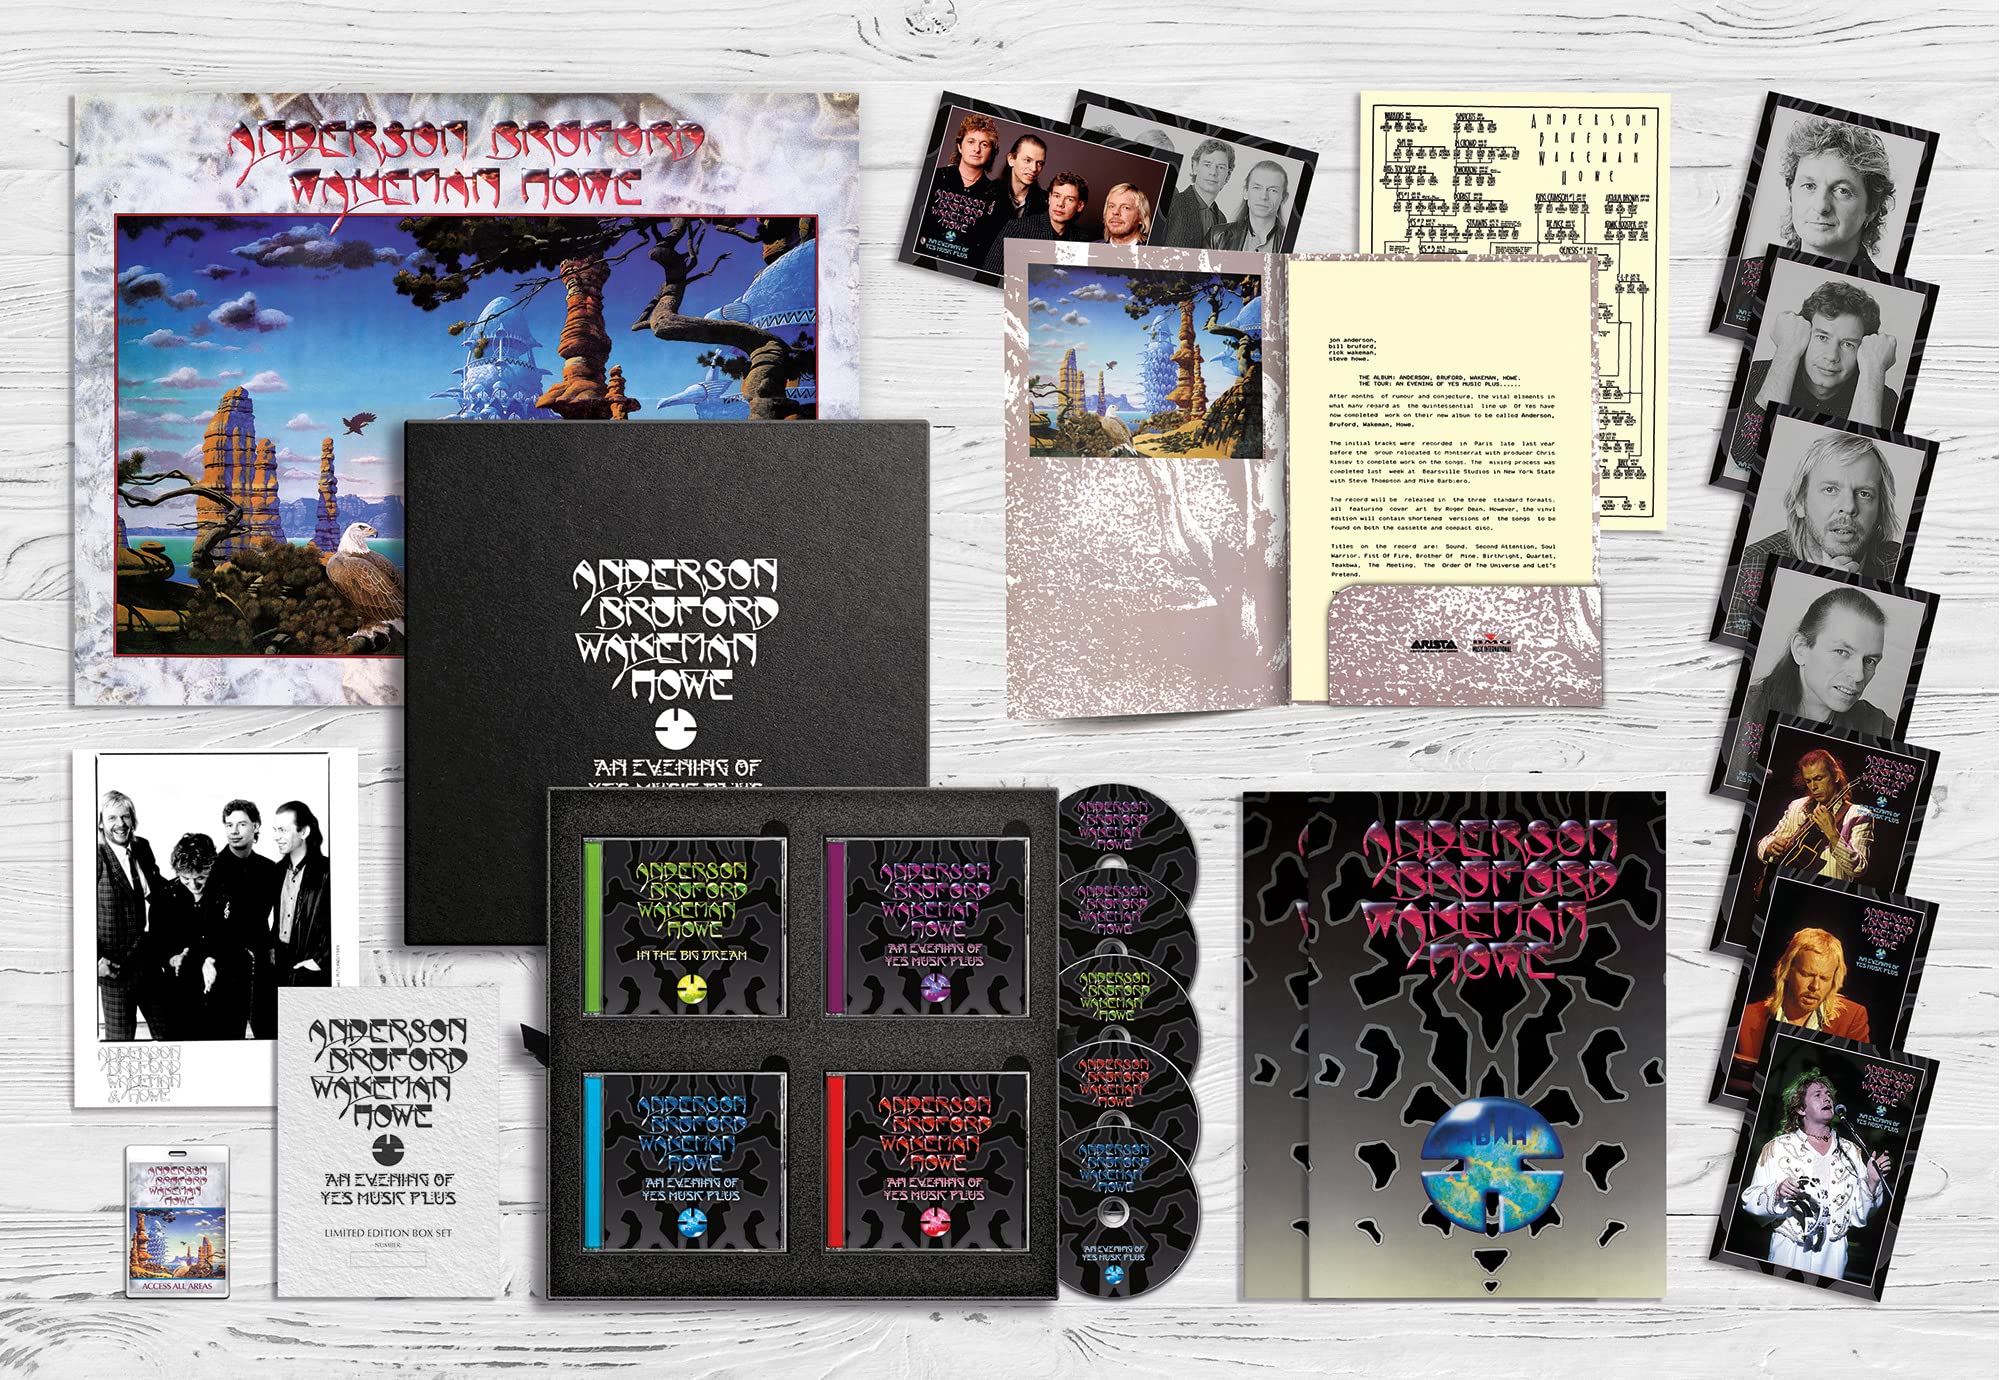 AN EVENING OF YES MUSIC PLUS (DELUXE BOX SET)